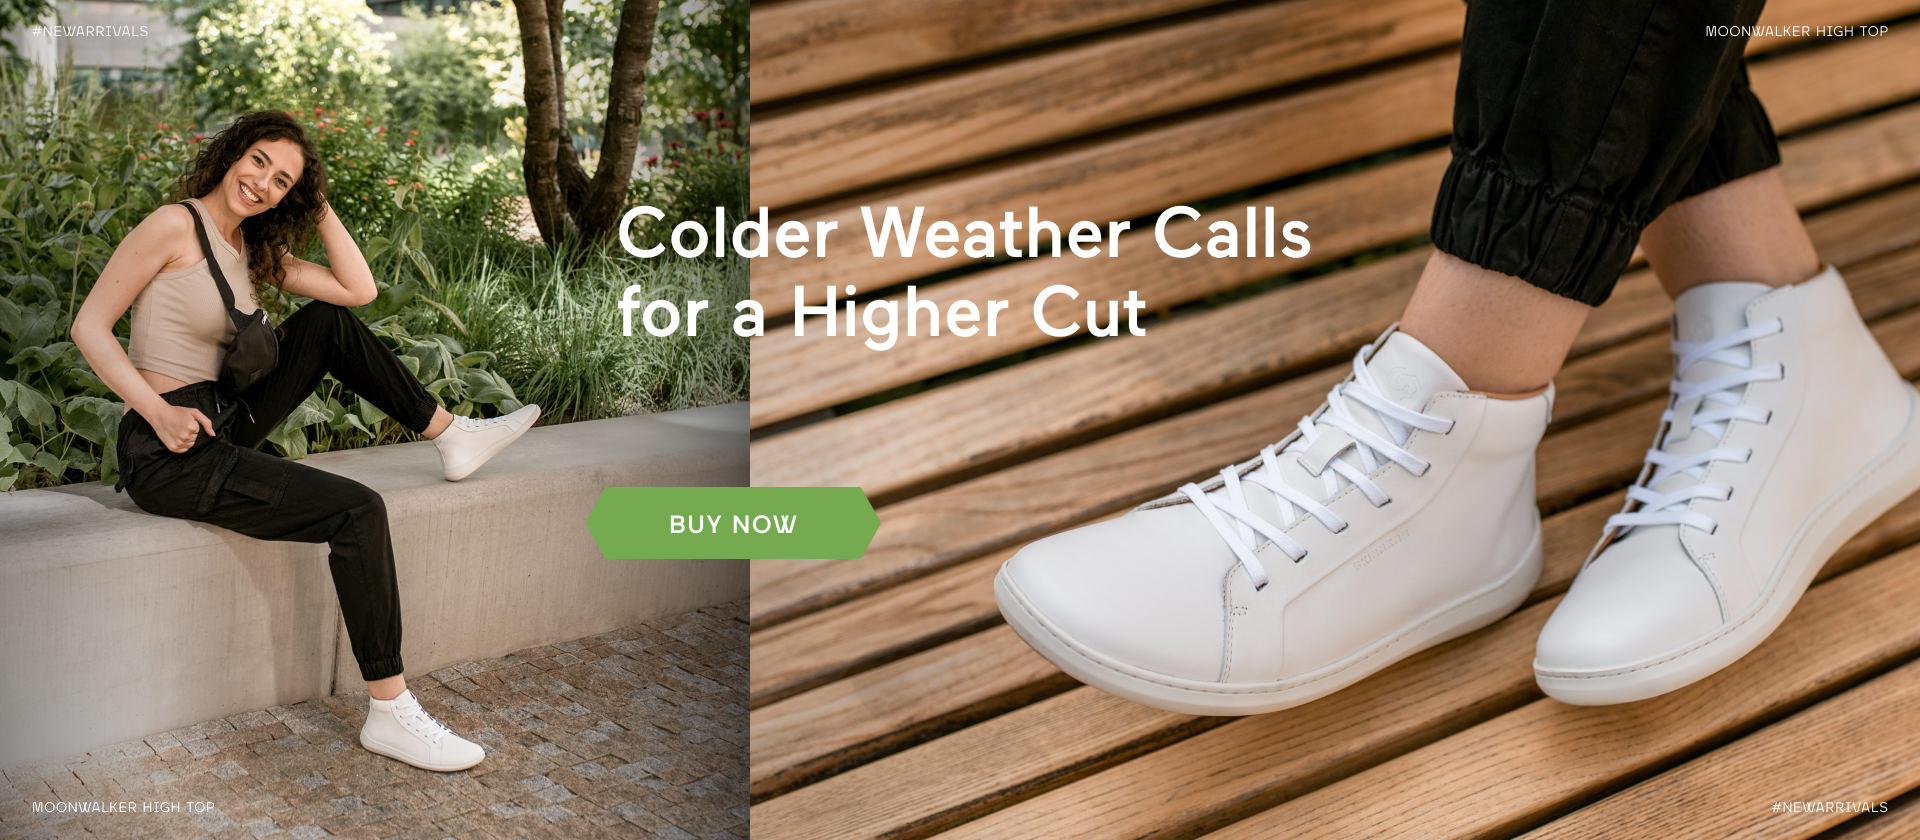 Go Light & Stay Protected, Skinners Footwear